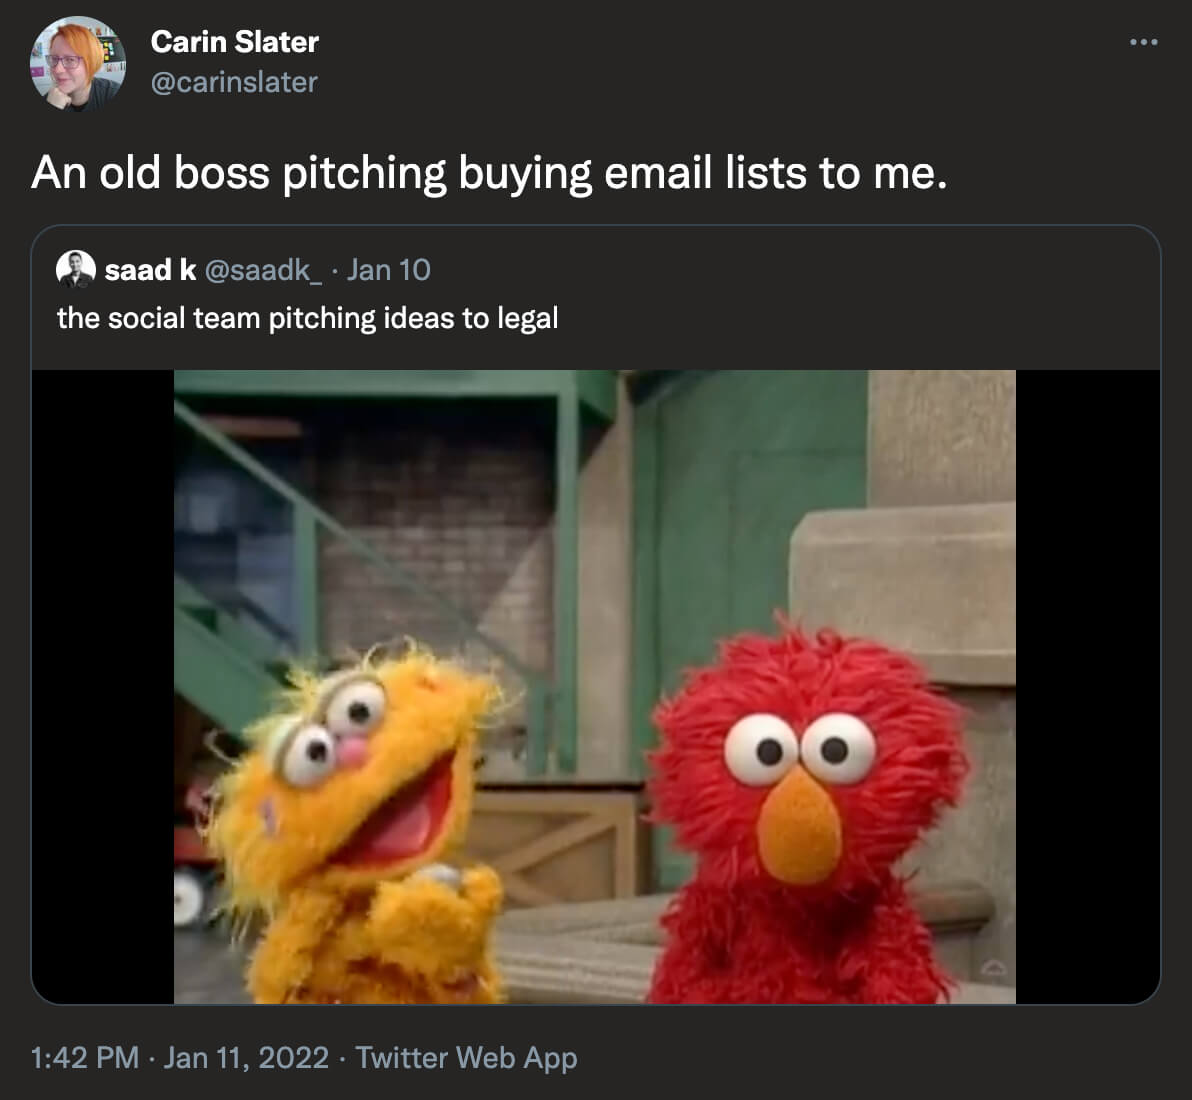 @carinslater on Twitter: An old boss pitching buying email lists to me. [Elmo listening to Zoe sing a song about Rocco]